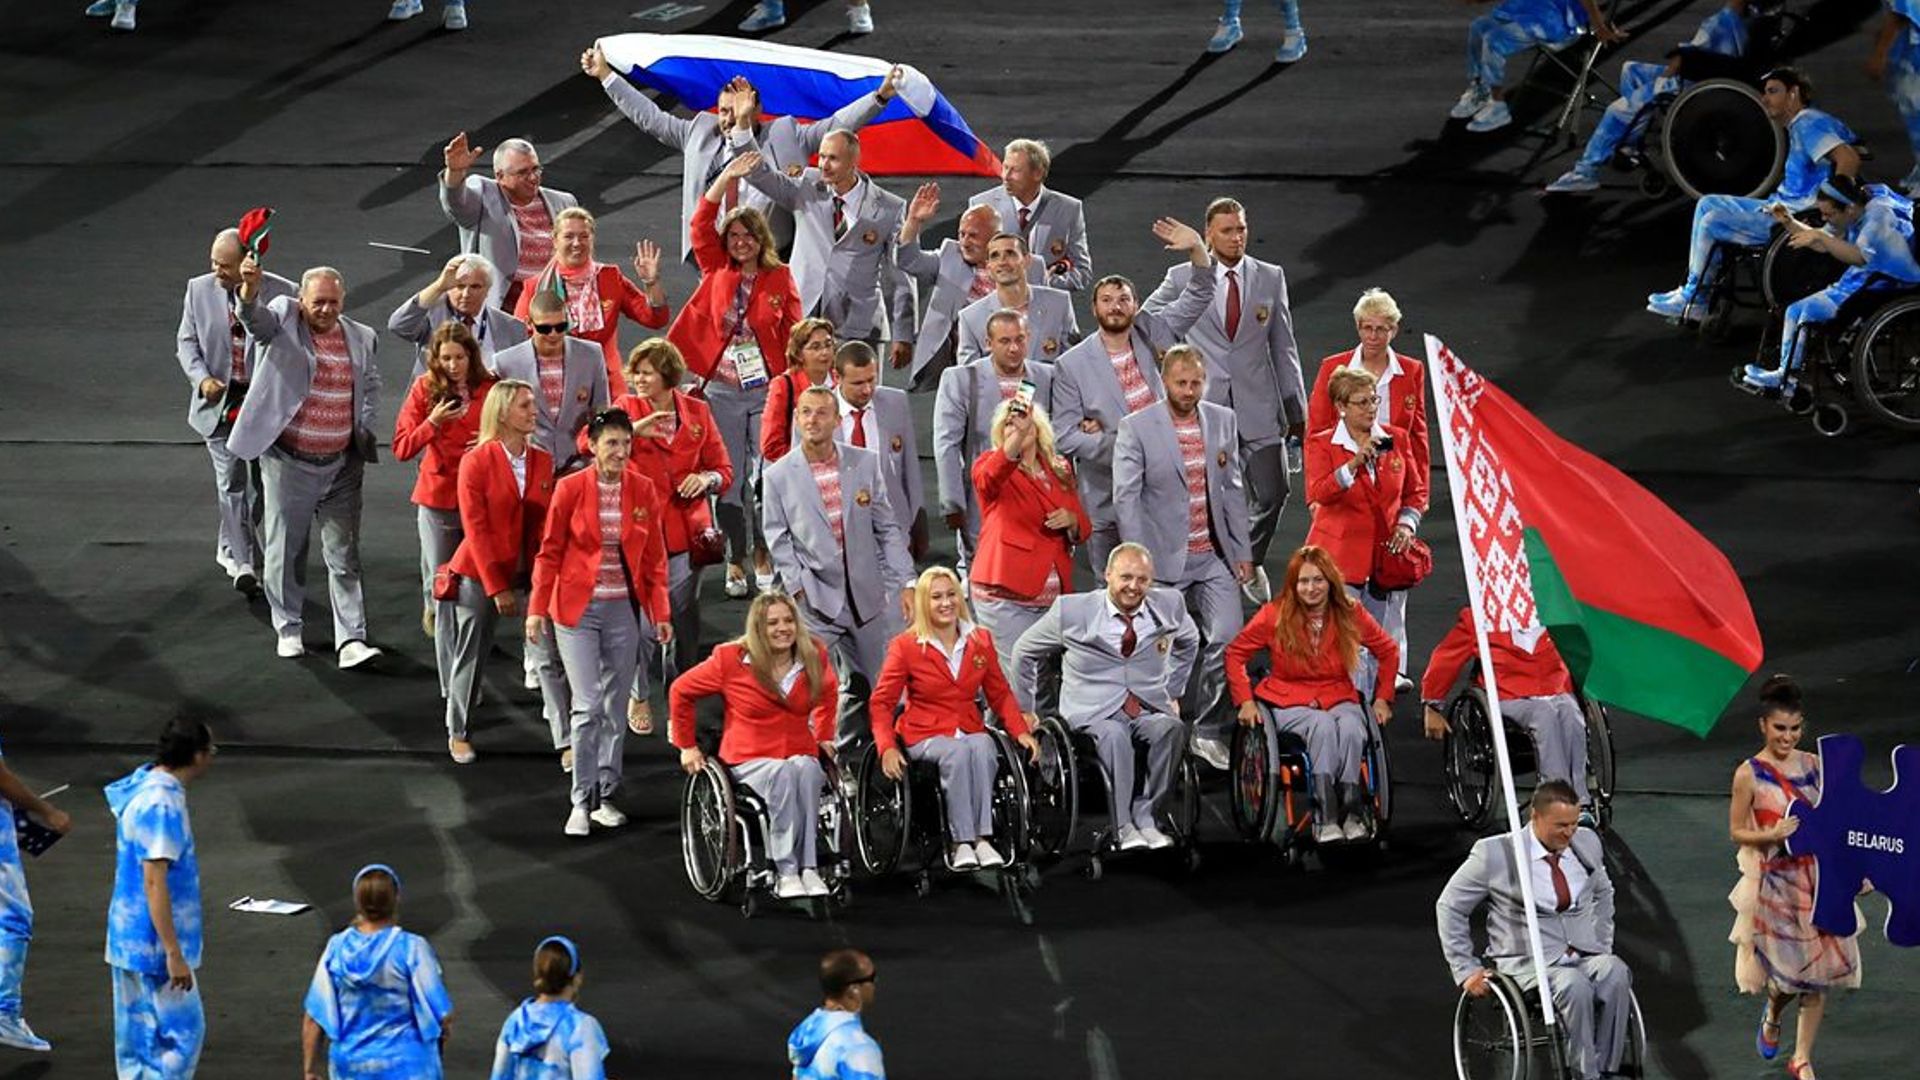 Neither Russian nor Belarusian athletes will be able to participate in the Paralympic Games in Beijing